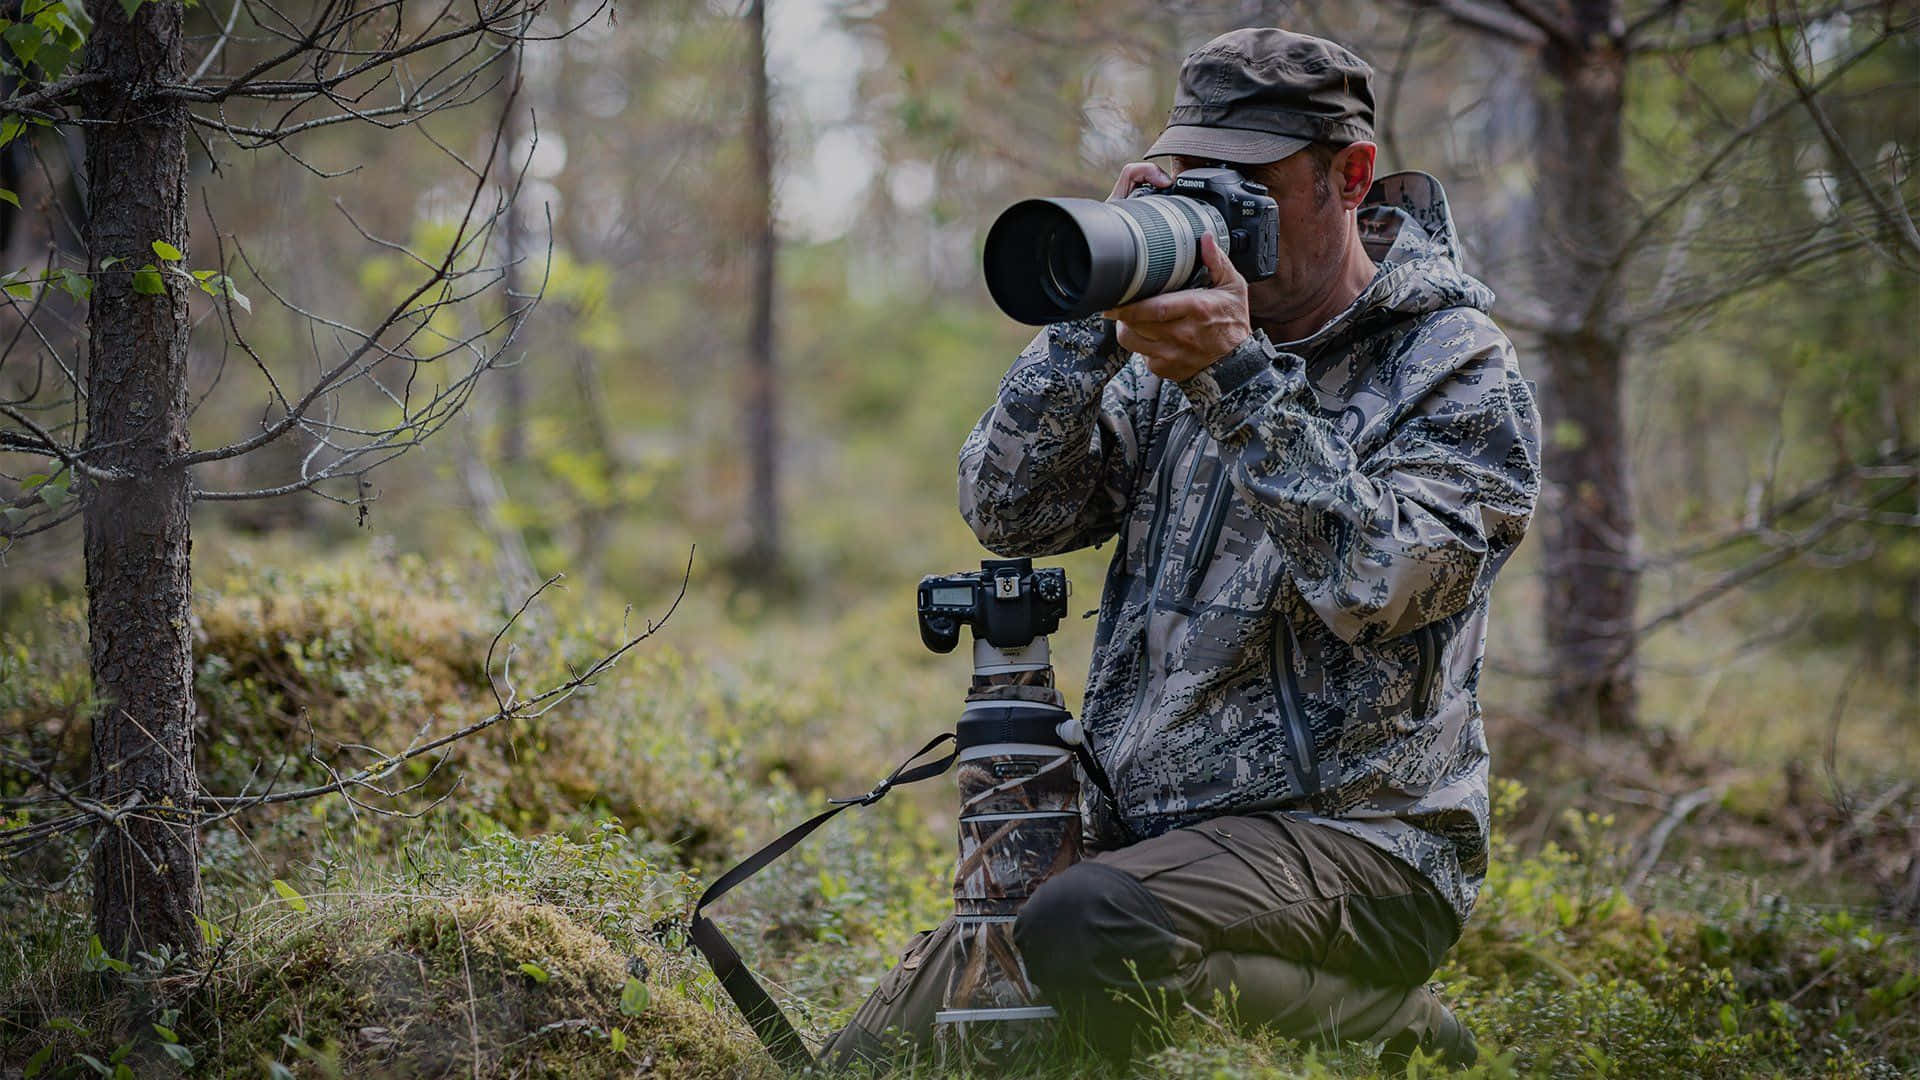 A Man In Camouflage Is Taking Pictures In The Woods